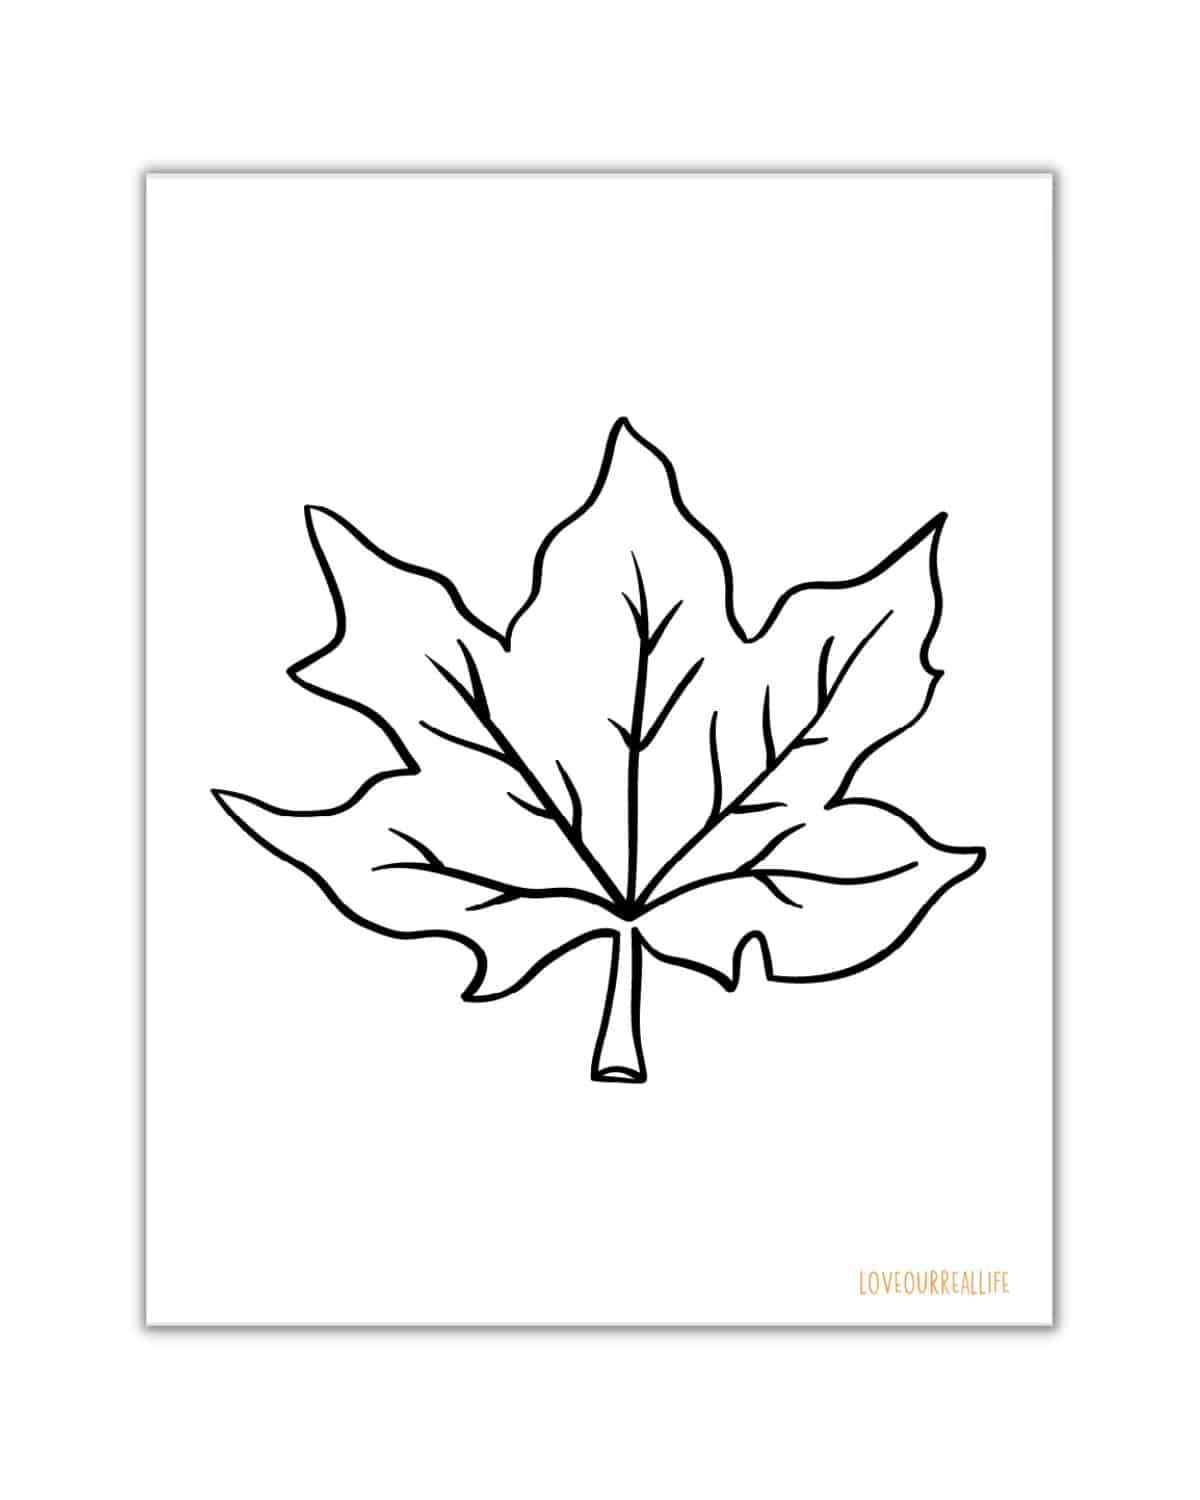 Single black and white maple leaf coloring sheet.